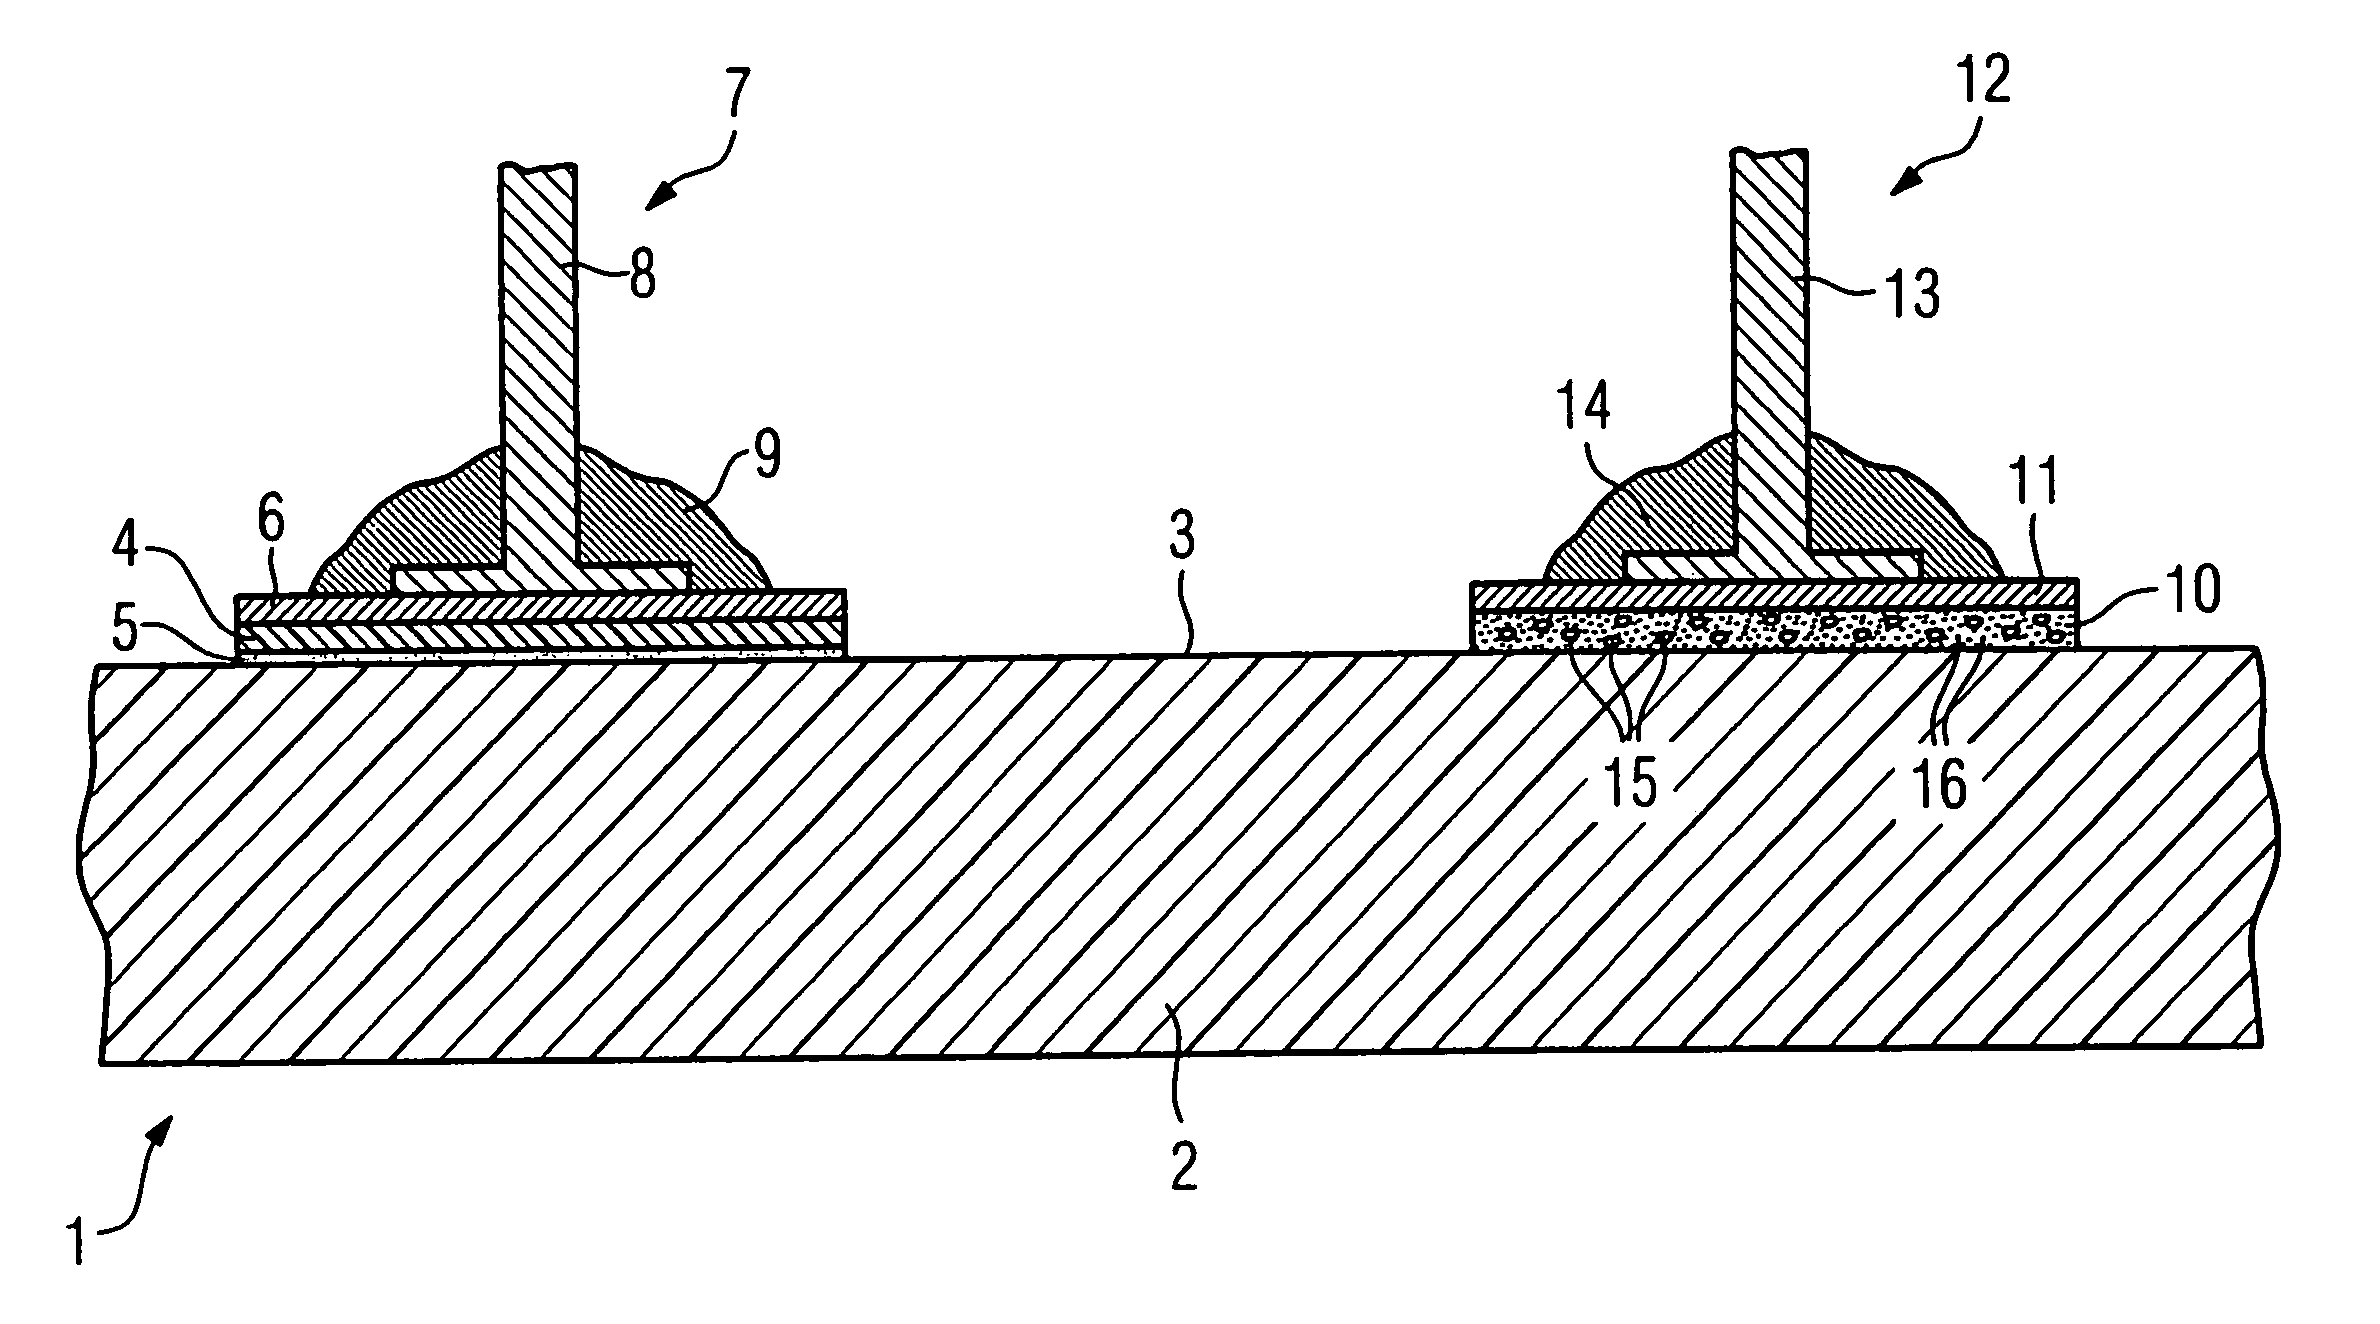 Plastic component having heat resistant hardened resin at thermal-attachment connection points